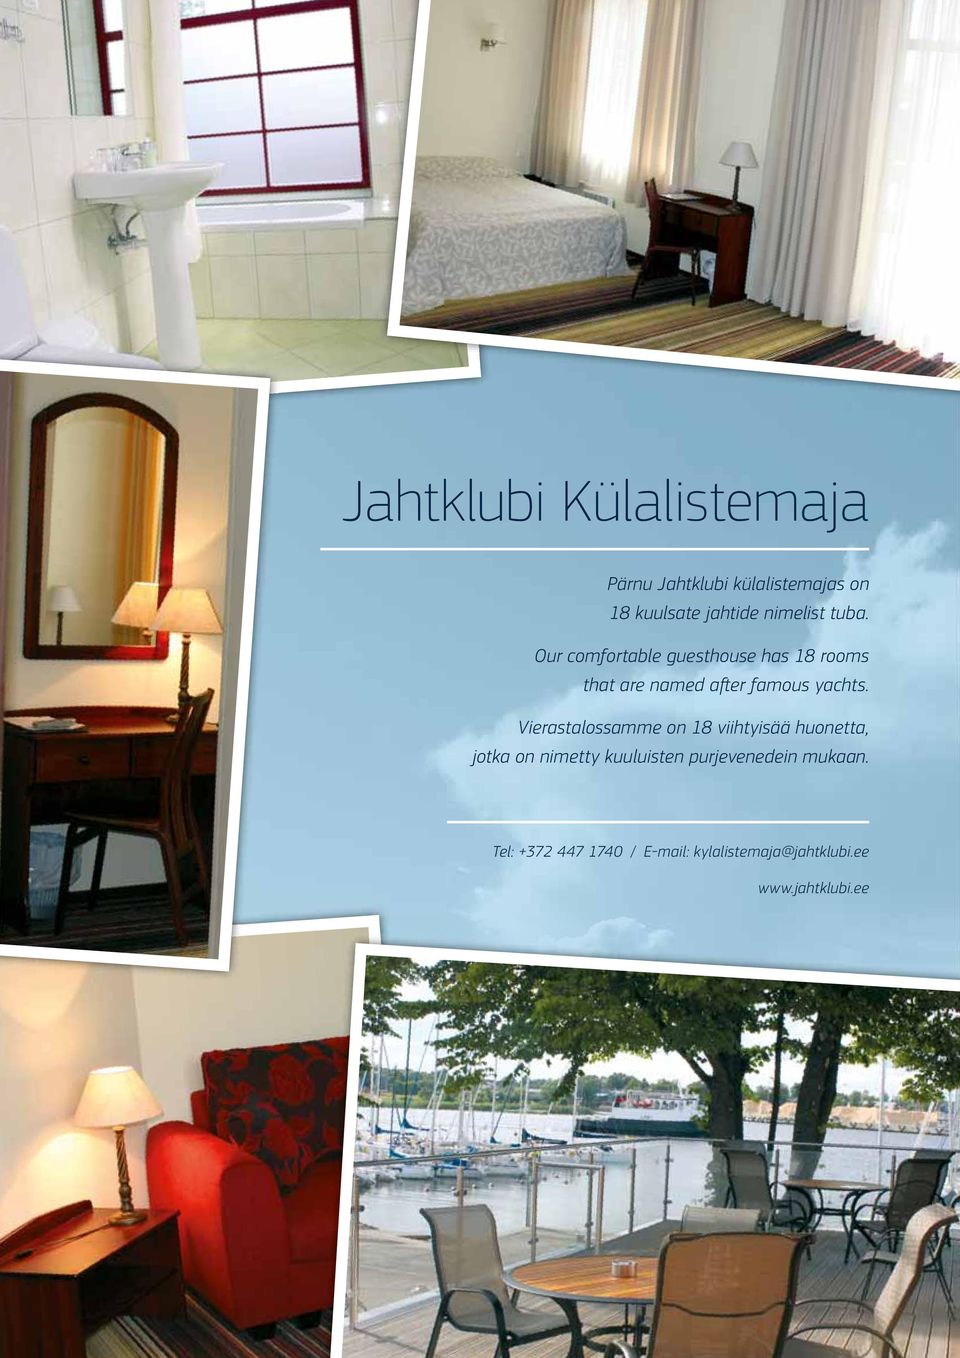 Our comfortable guesthouse has 18 rooms that are named after famous yachts.